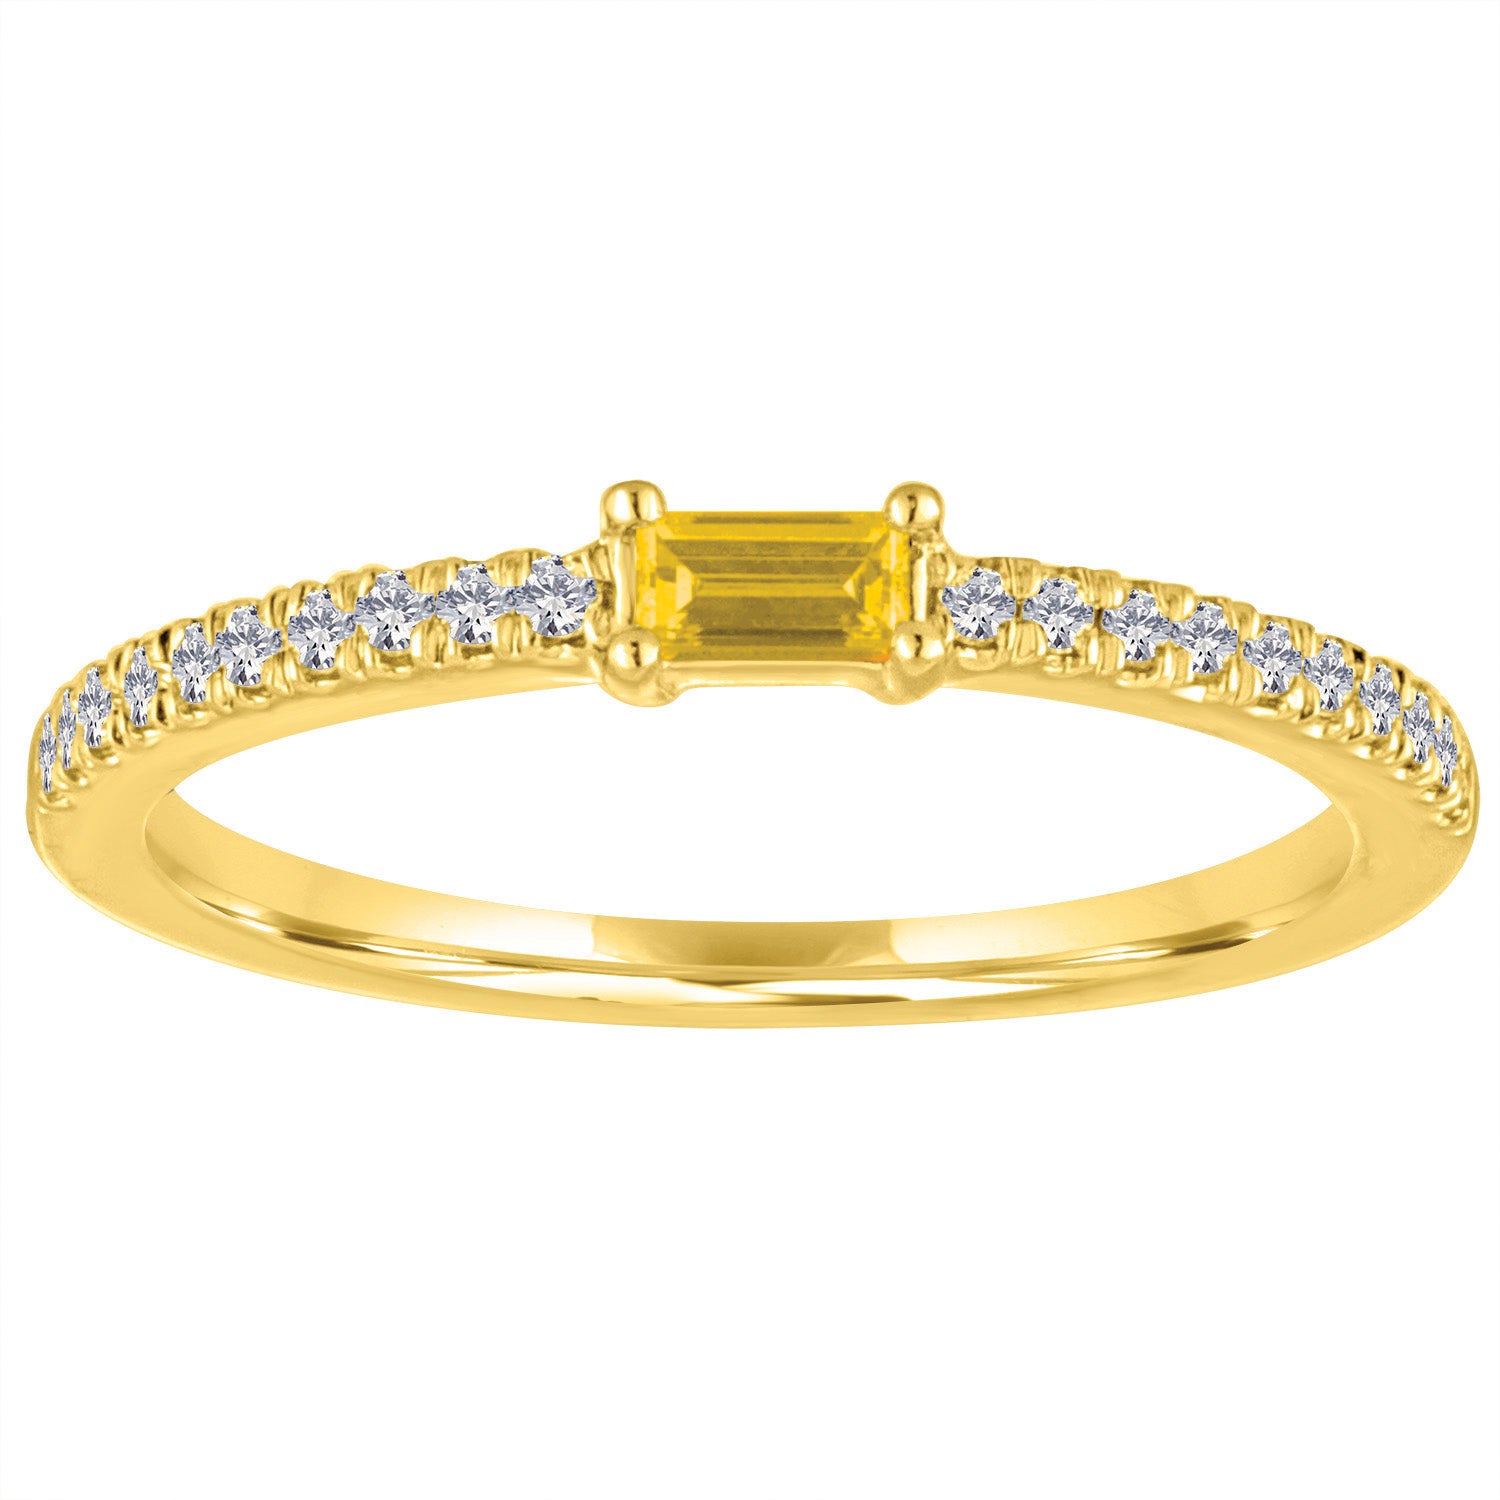 Yellow gold skinny band with citrine baguette in the center and round diamonds on the shank. 